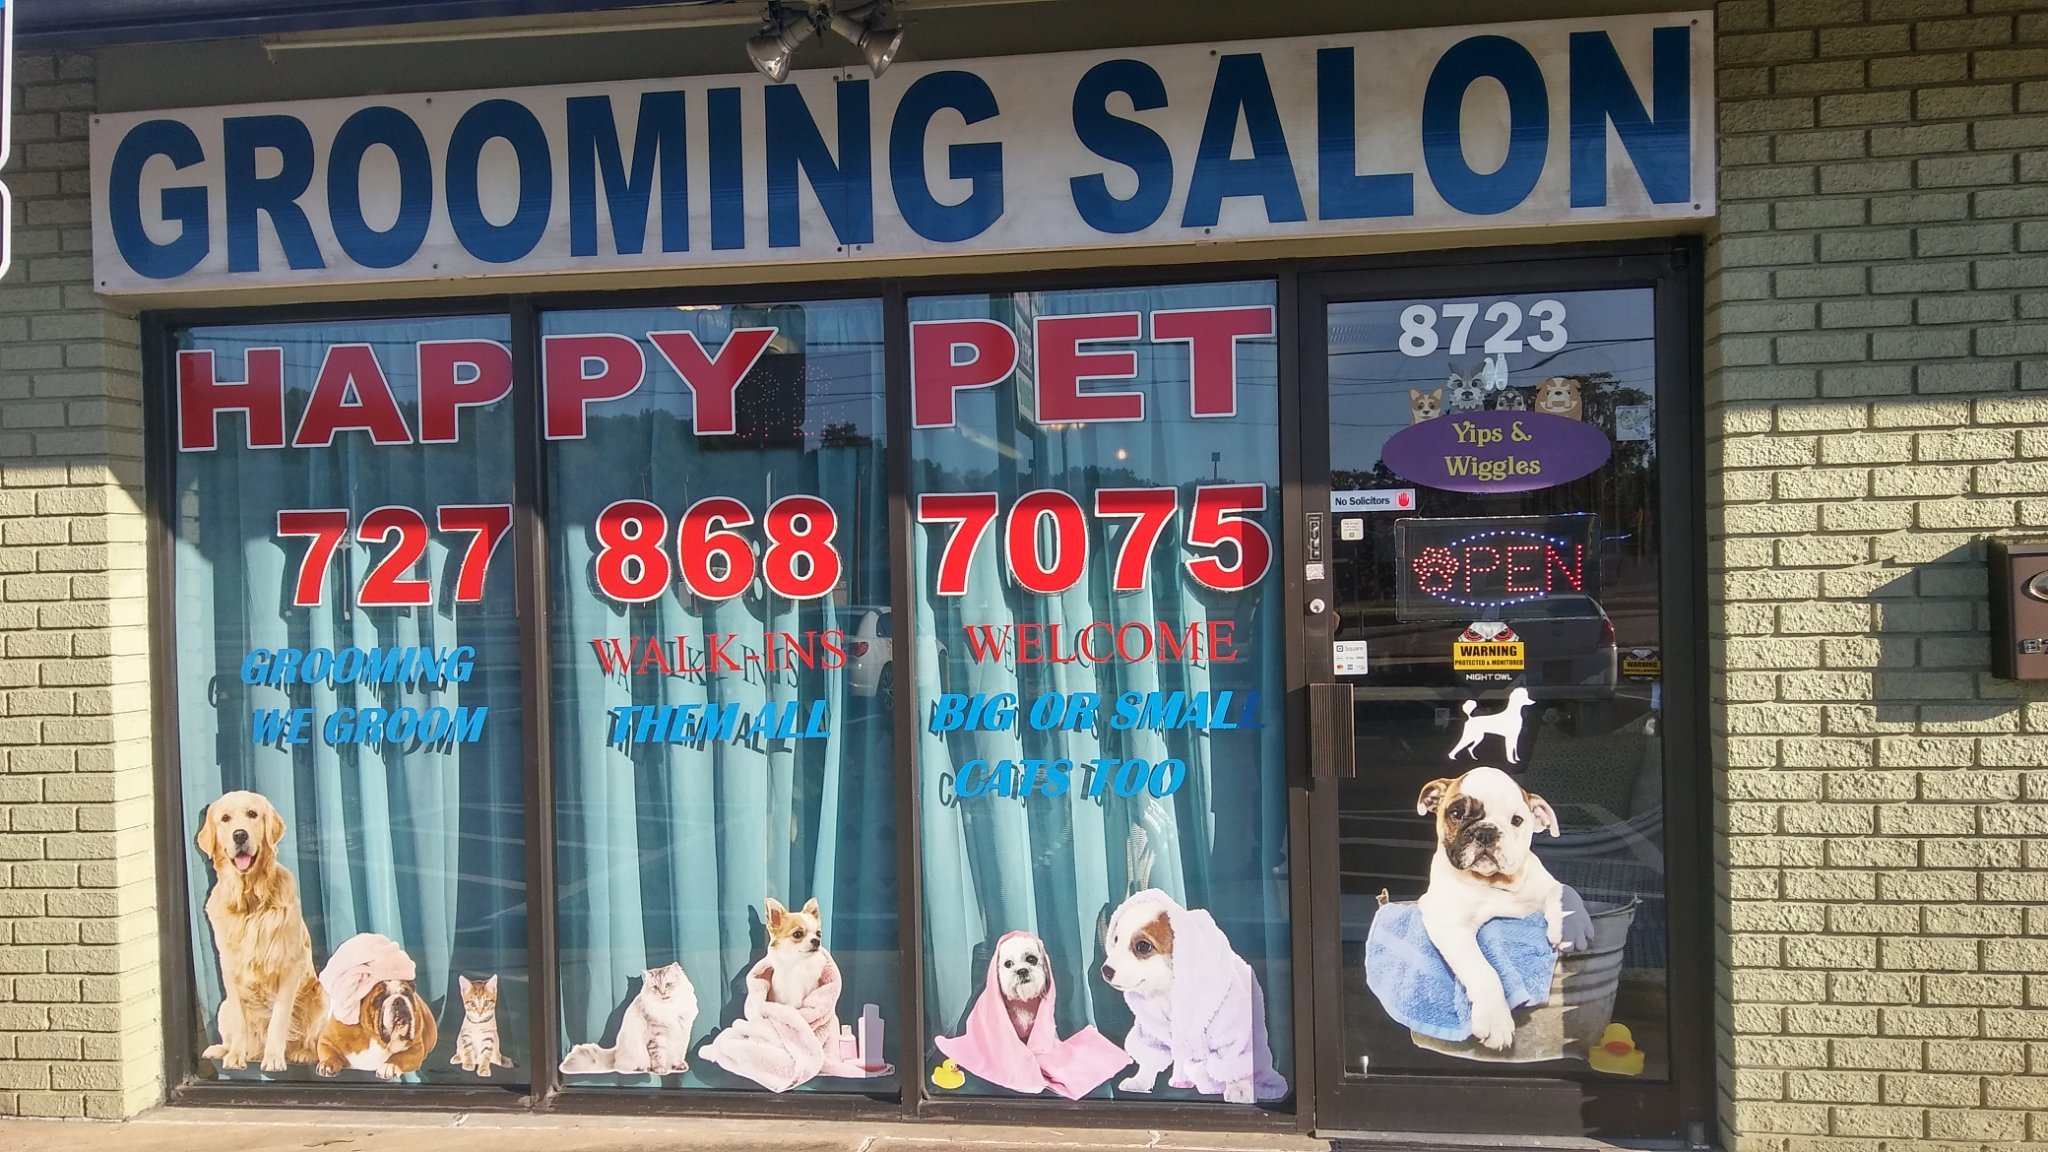 Hello!  We are the new owners of Happy Pets Grooming Salon in Hudson Florida!